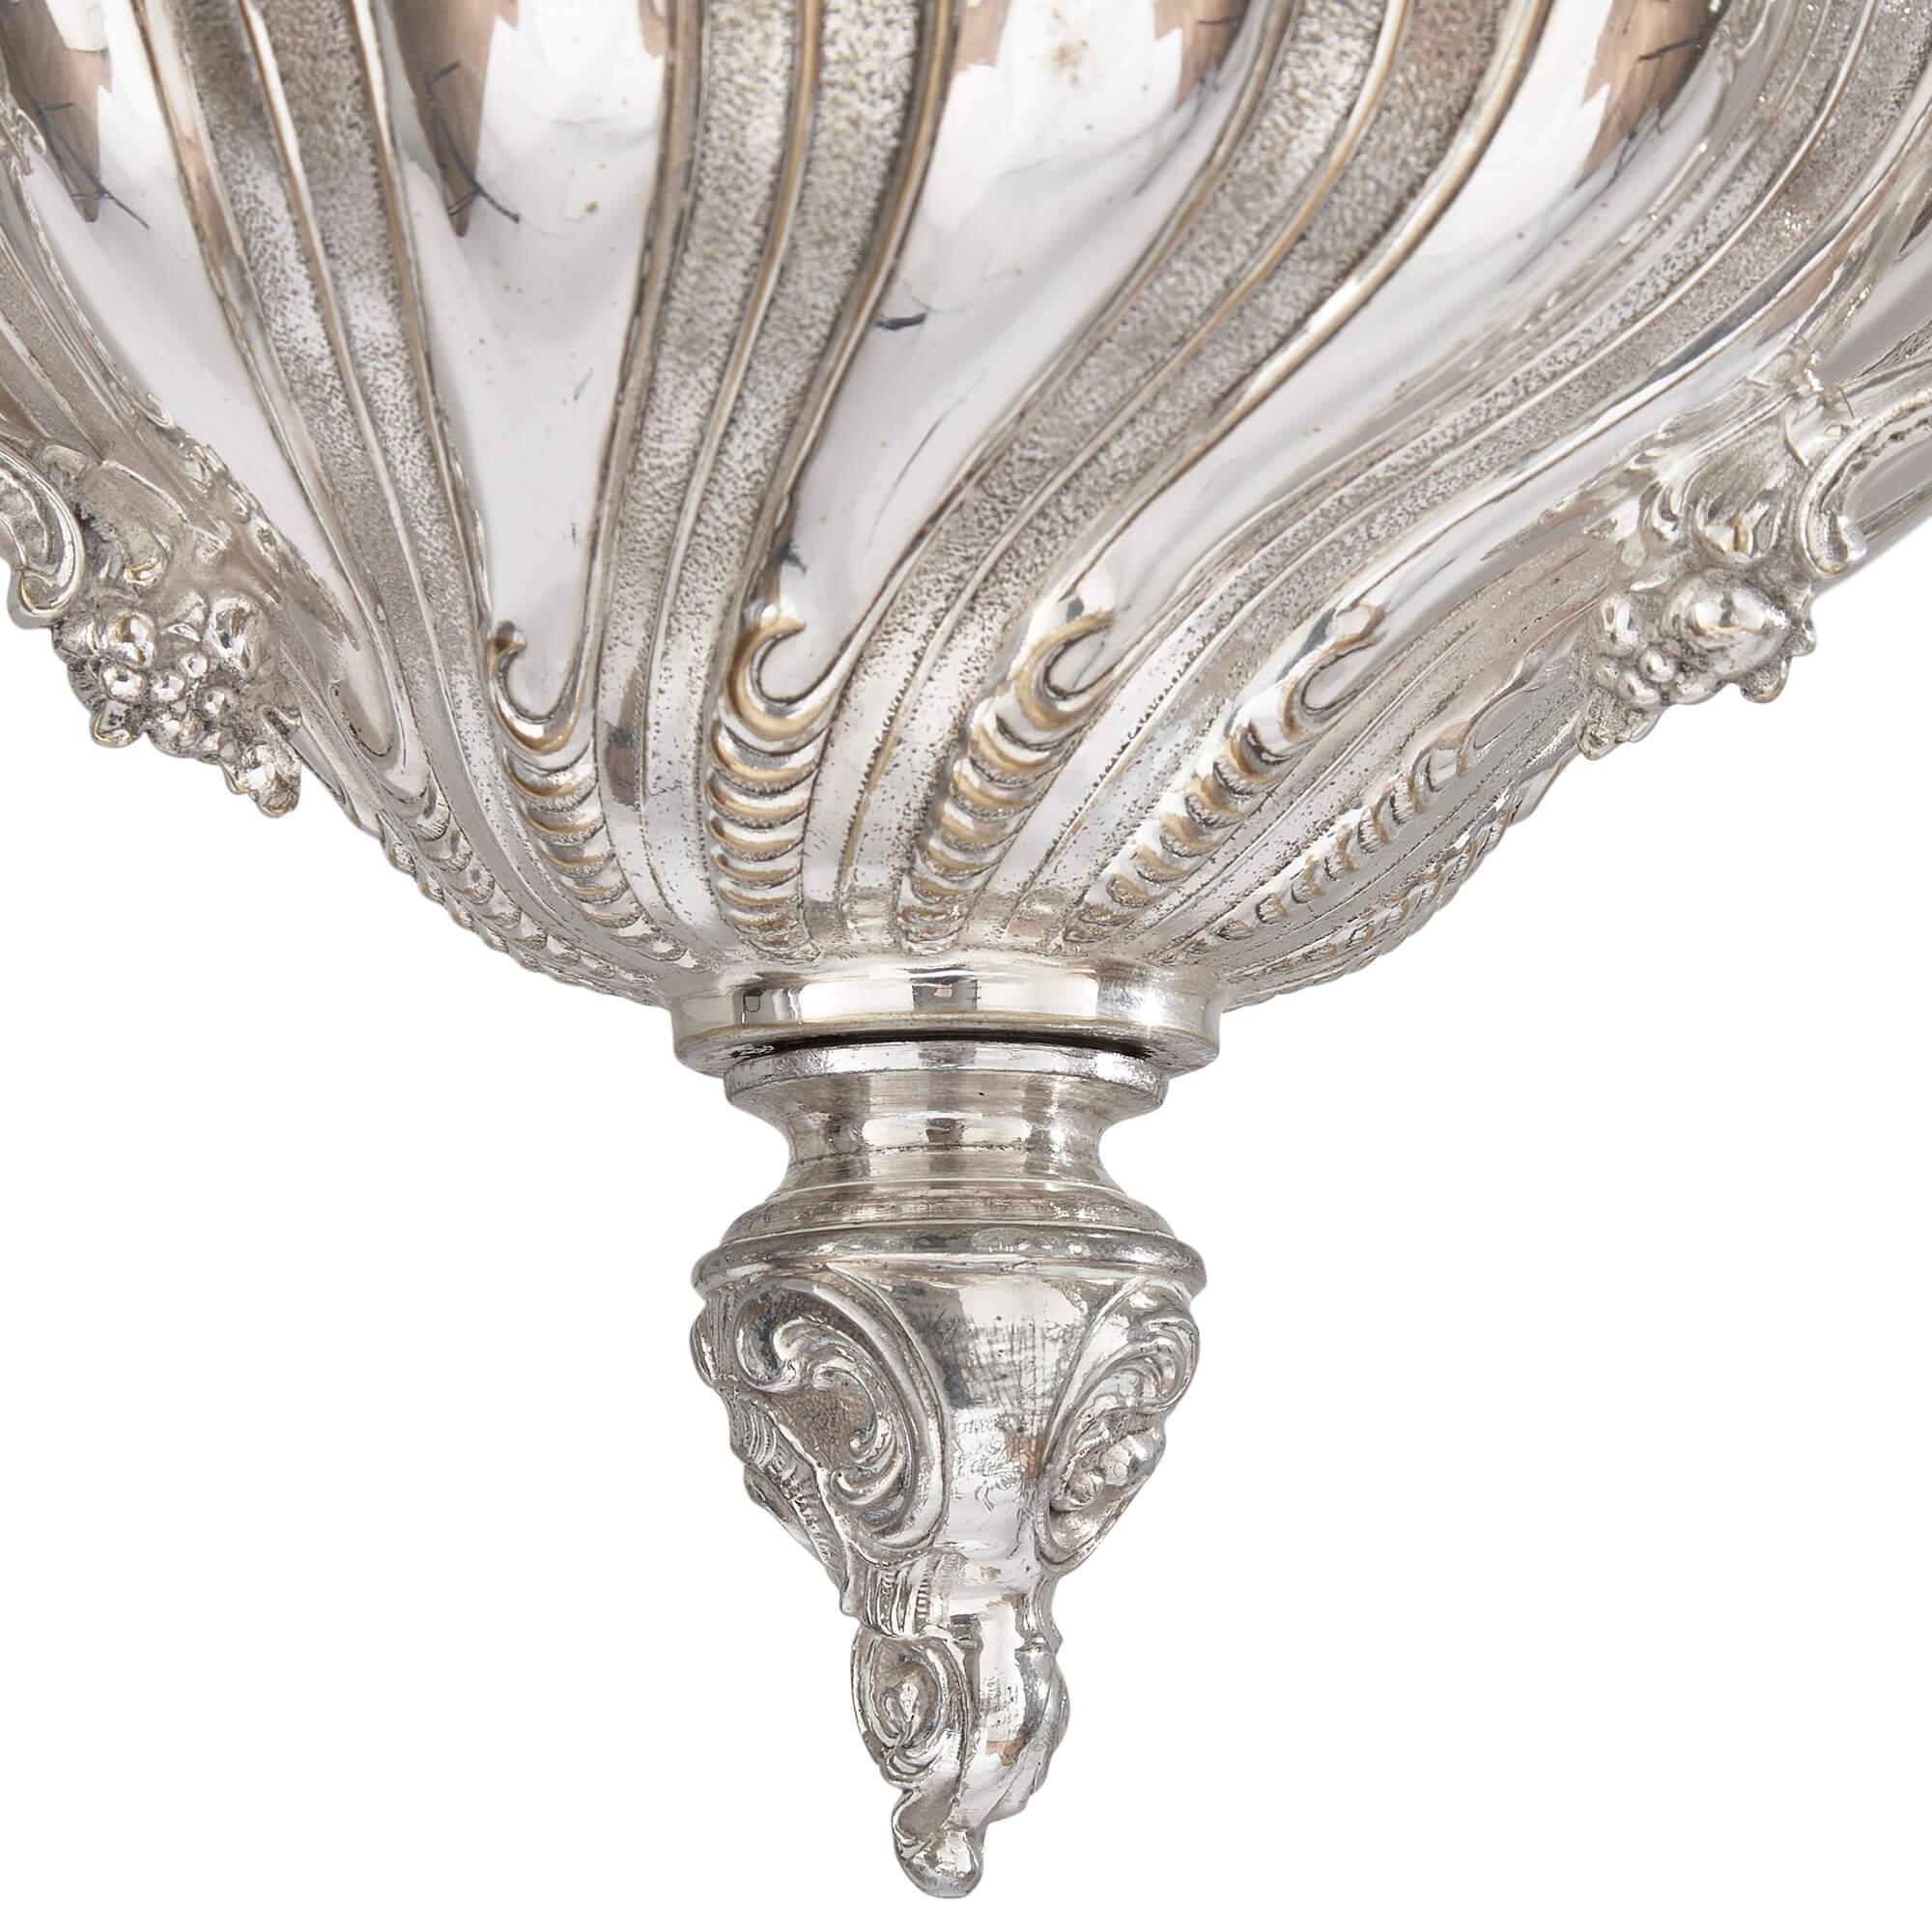 Large German Silver-Plated Hanging Lantern by WMF In Good Condition For Sale In London, GB